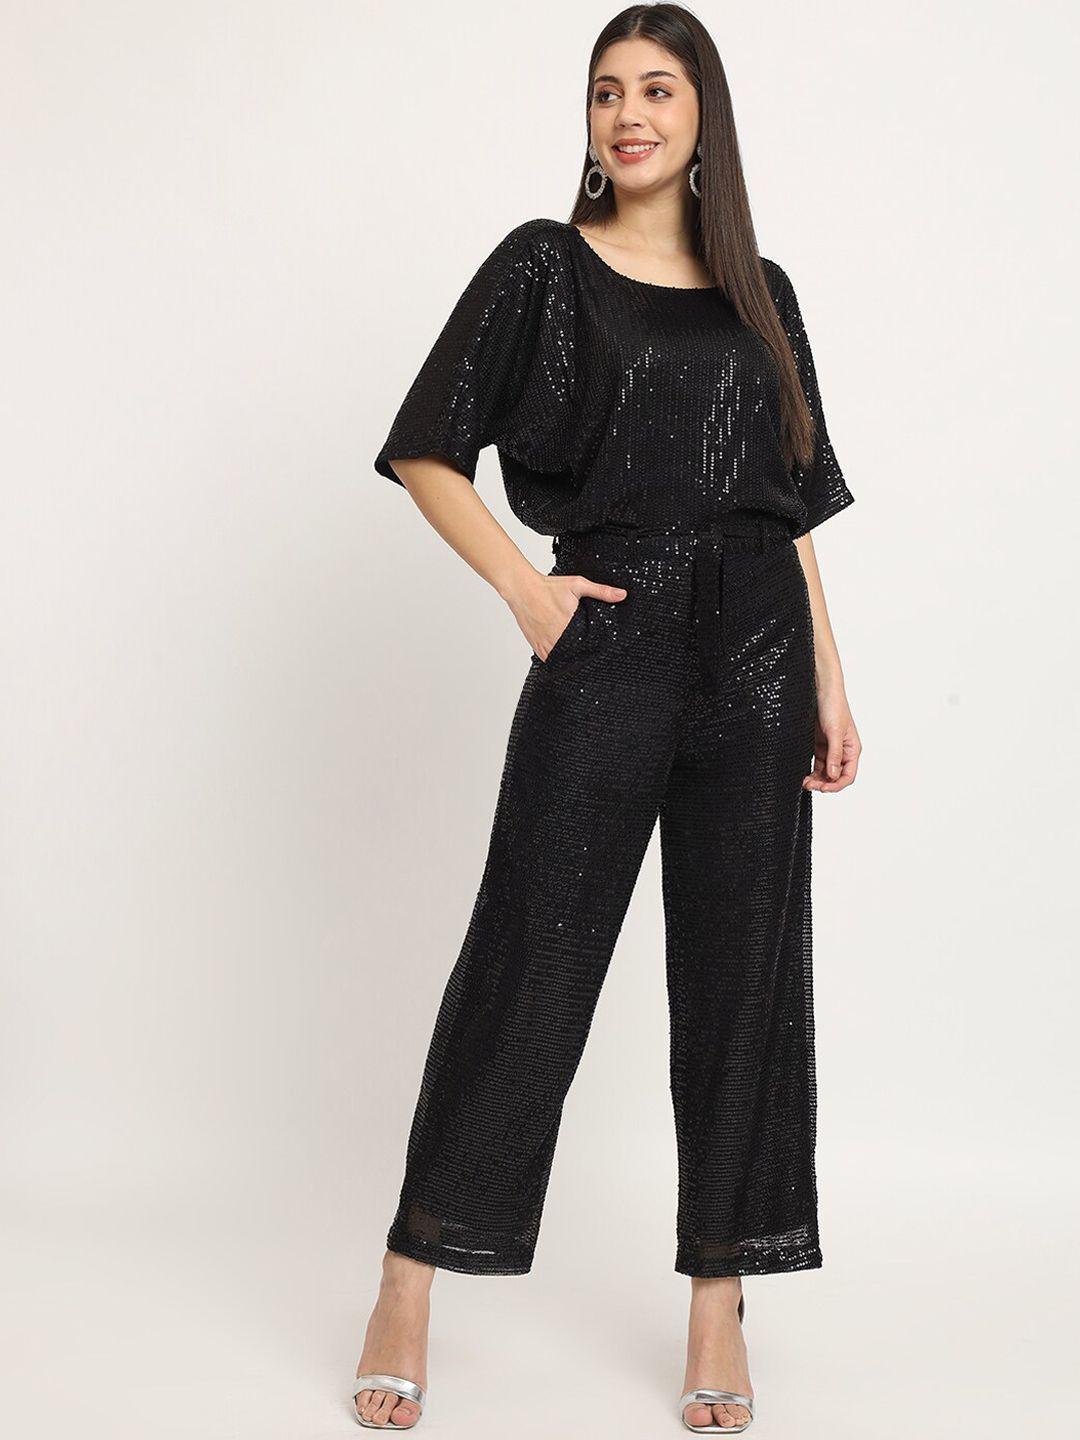 isam embellished flared sleeves sequined top with trouser